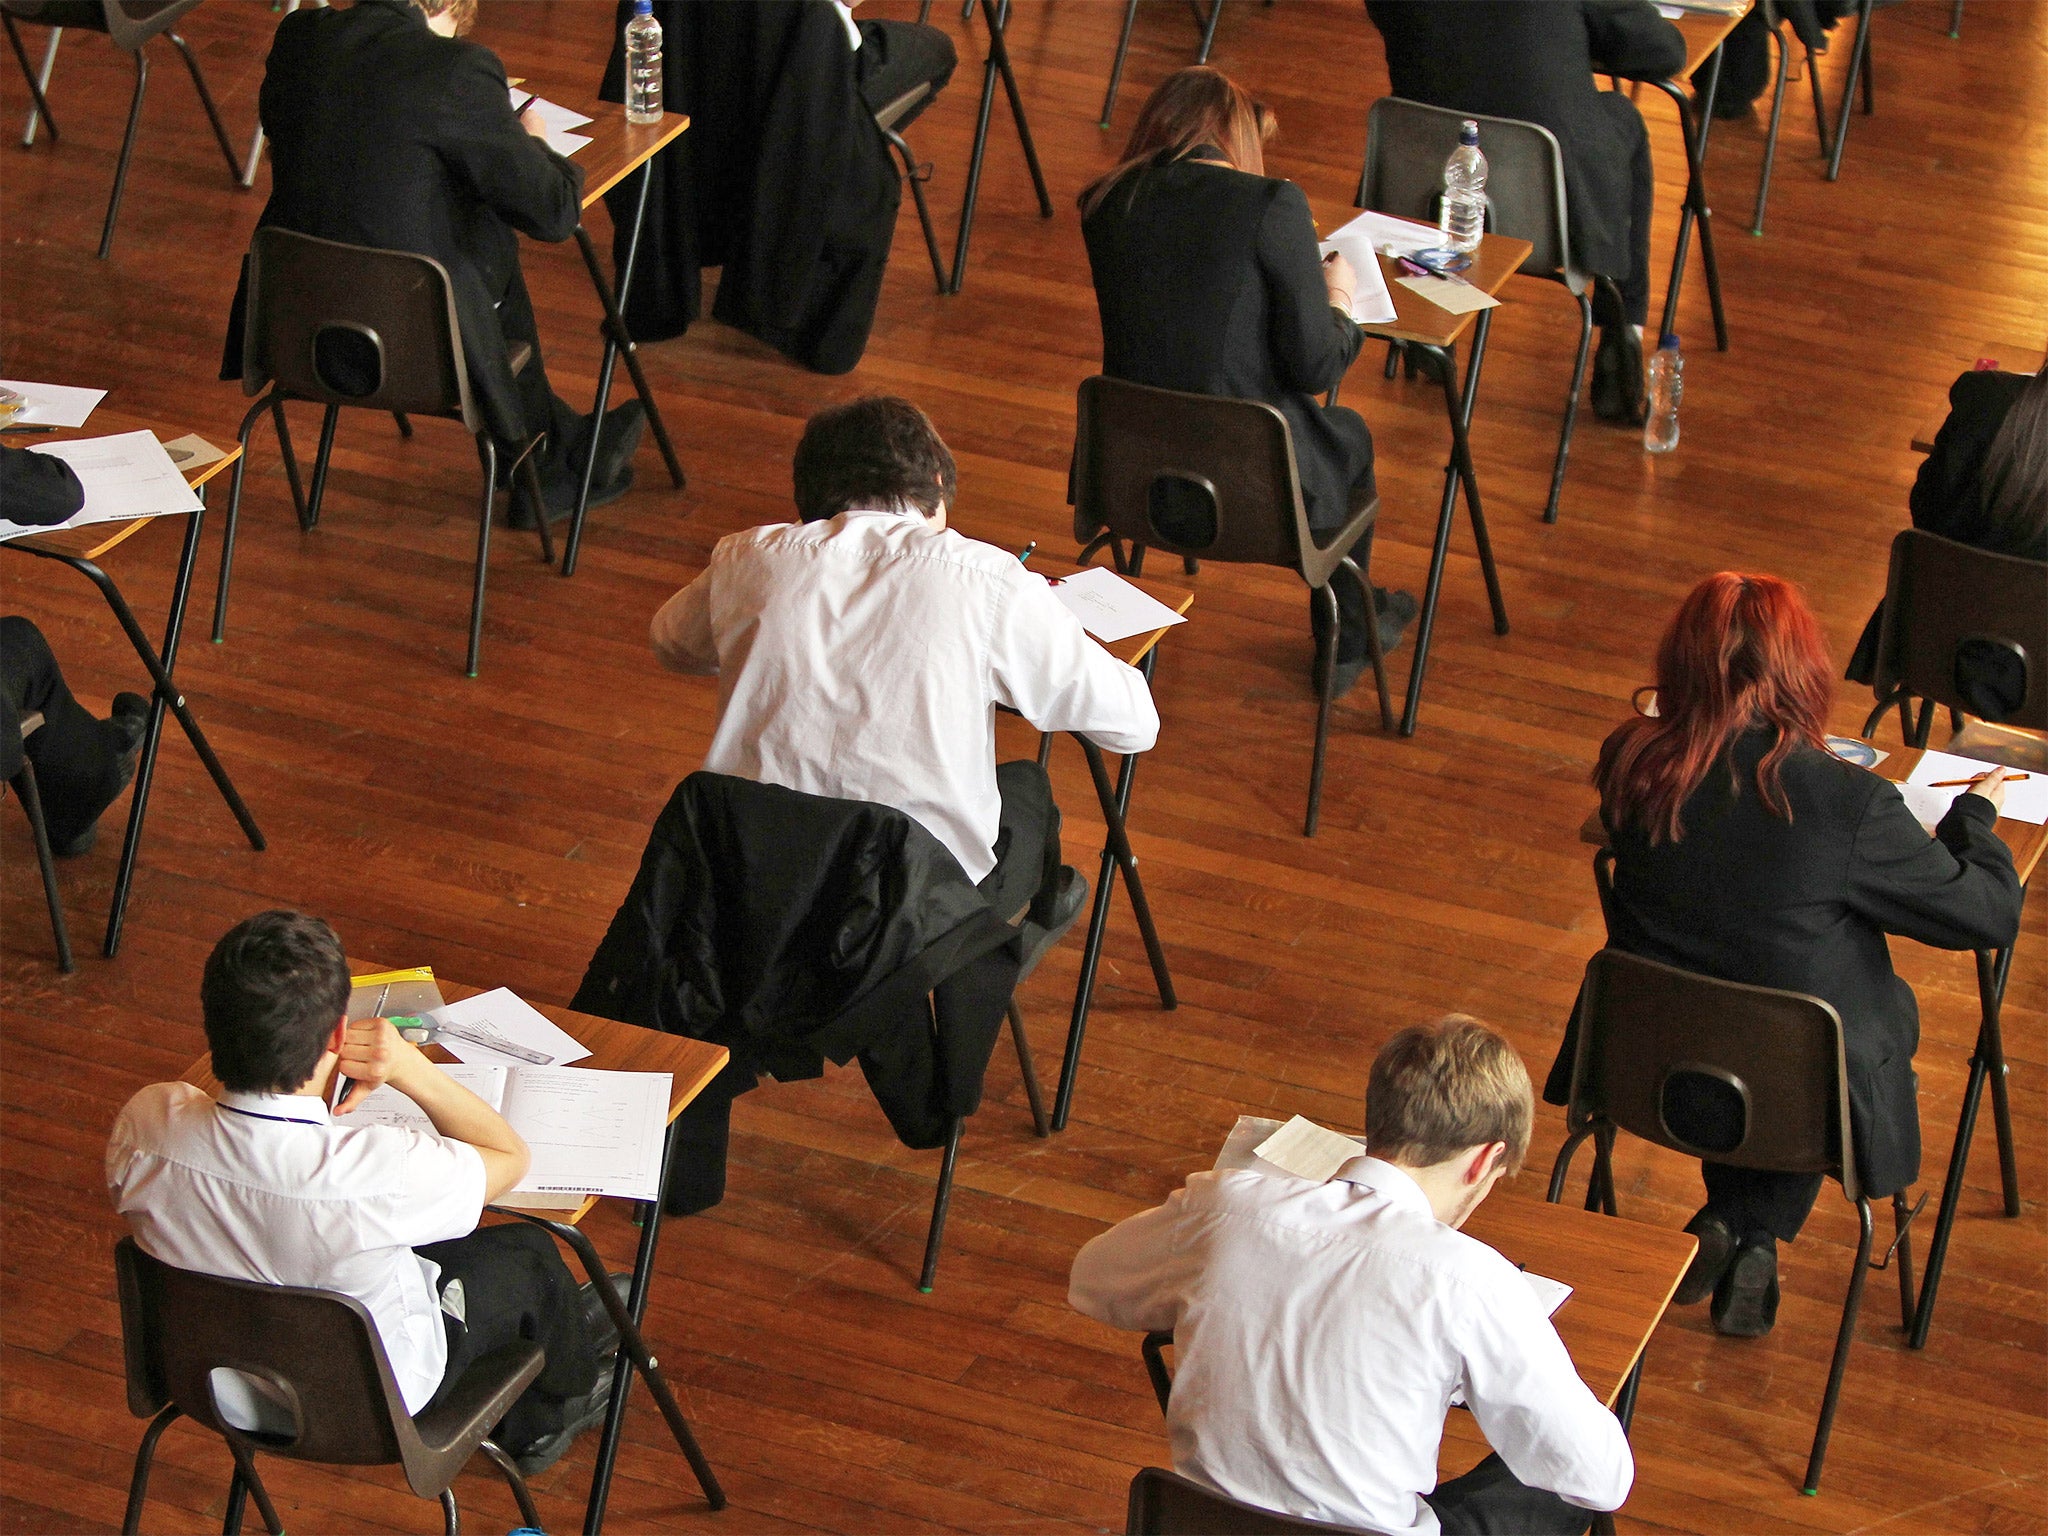 Ofqual's figures show a 56 per cent increase in GCSE exam papers queried by schools